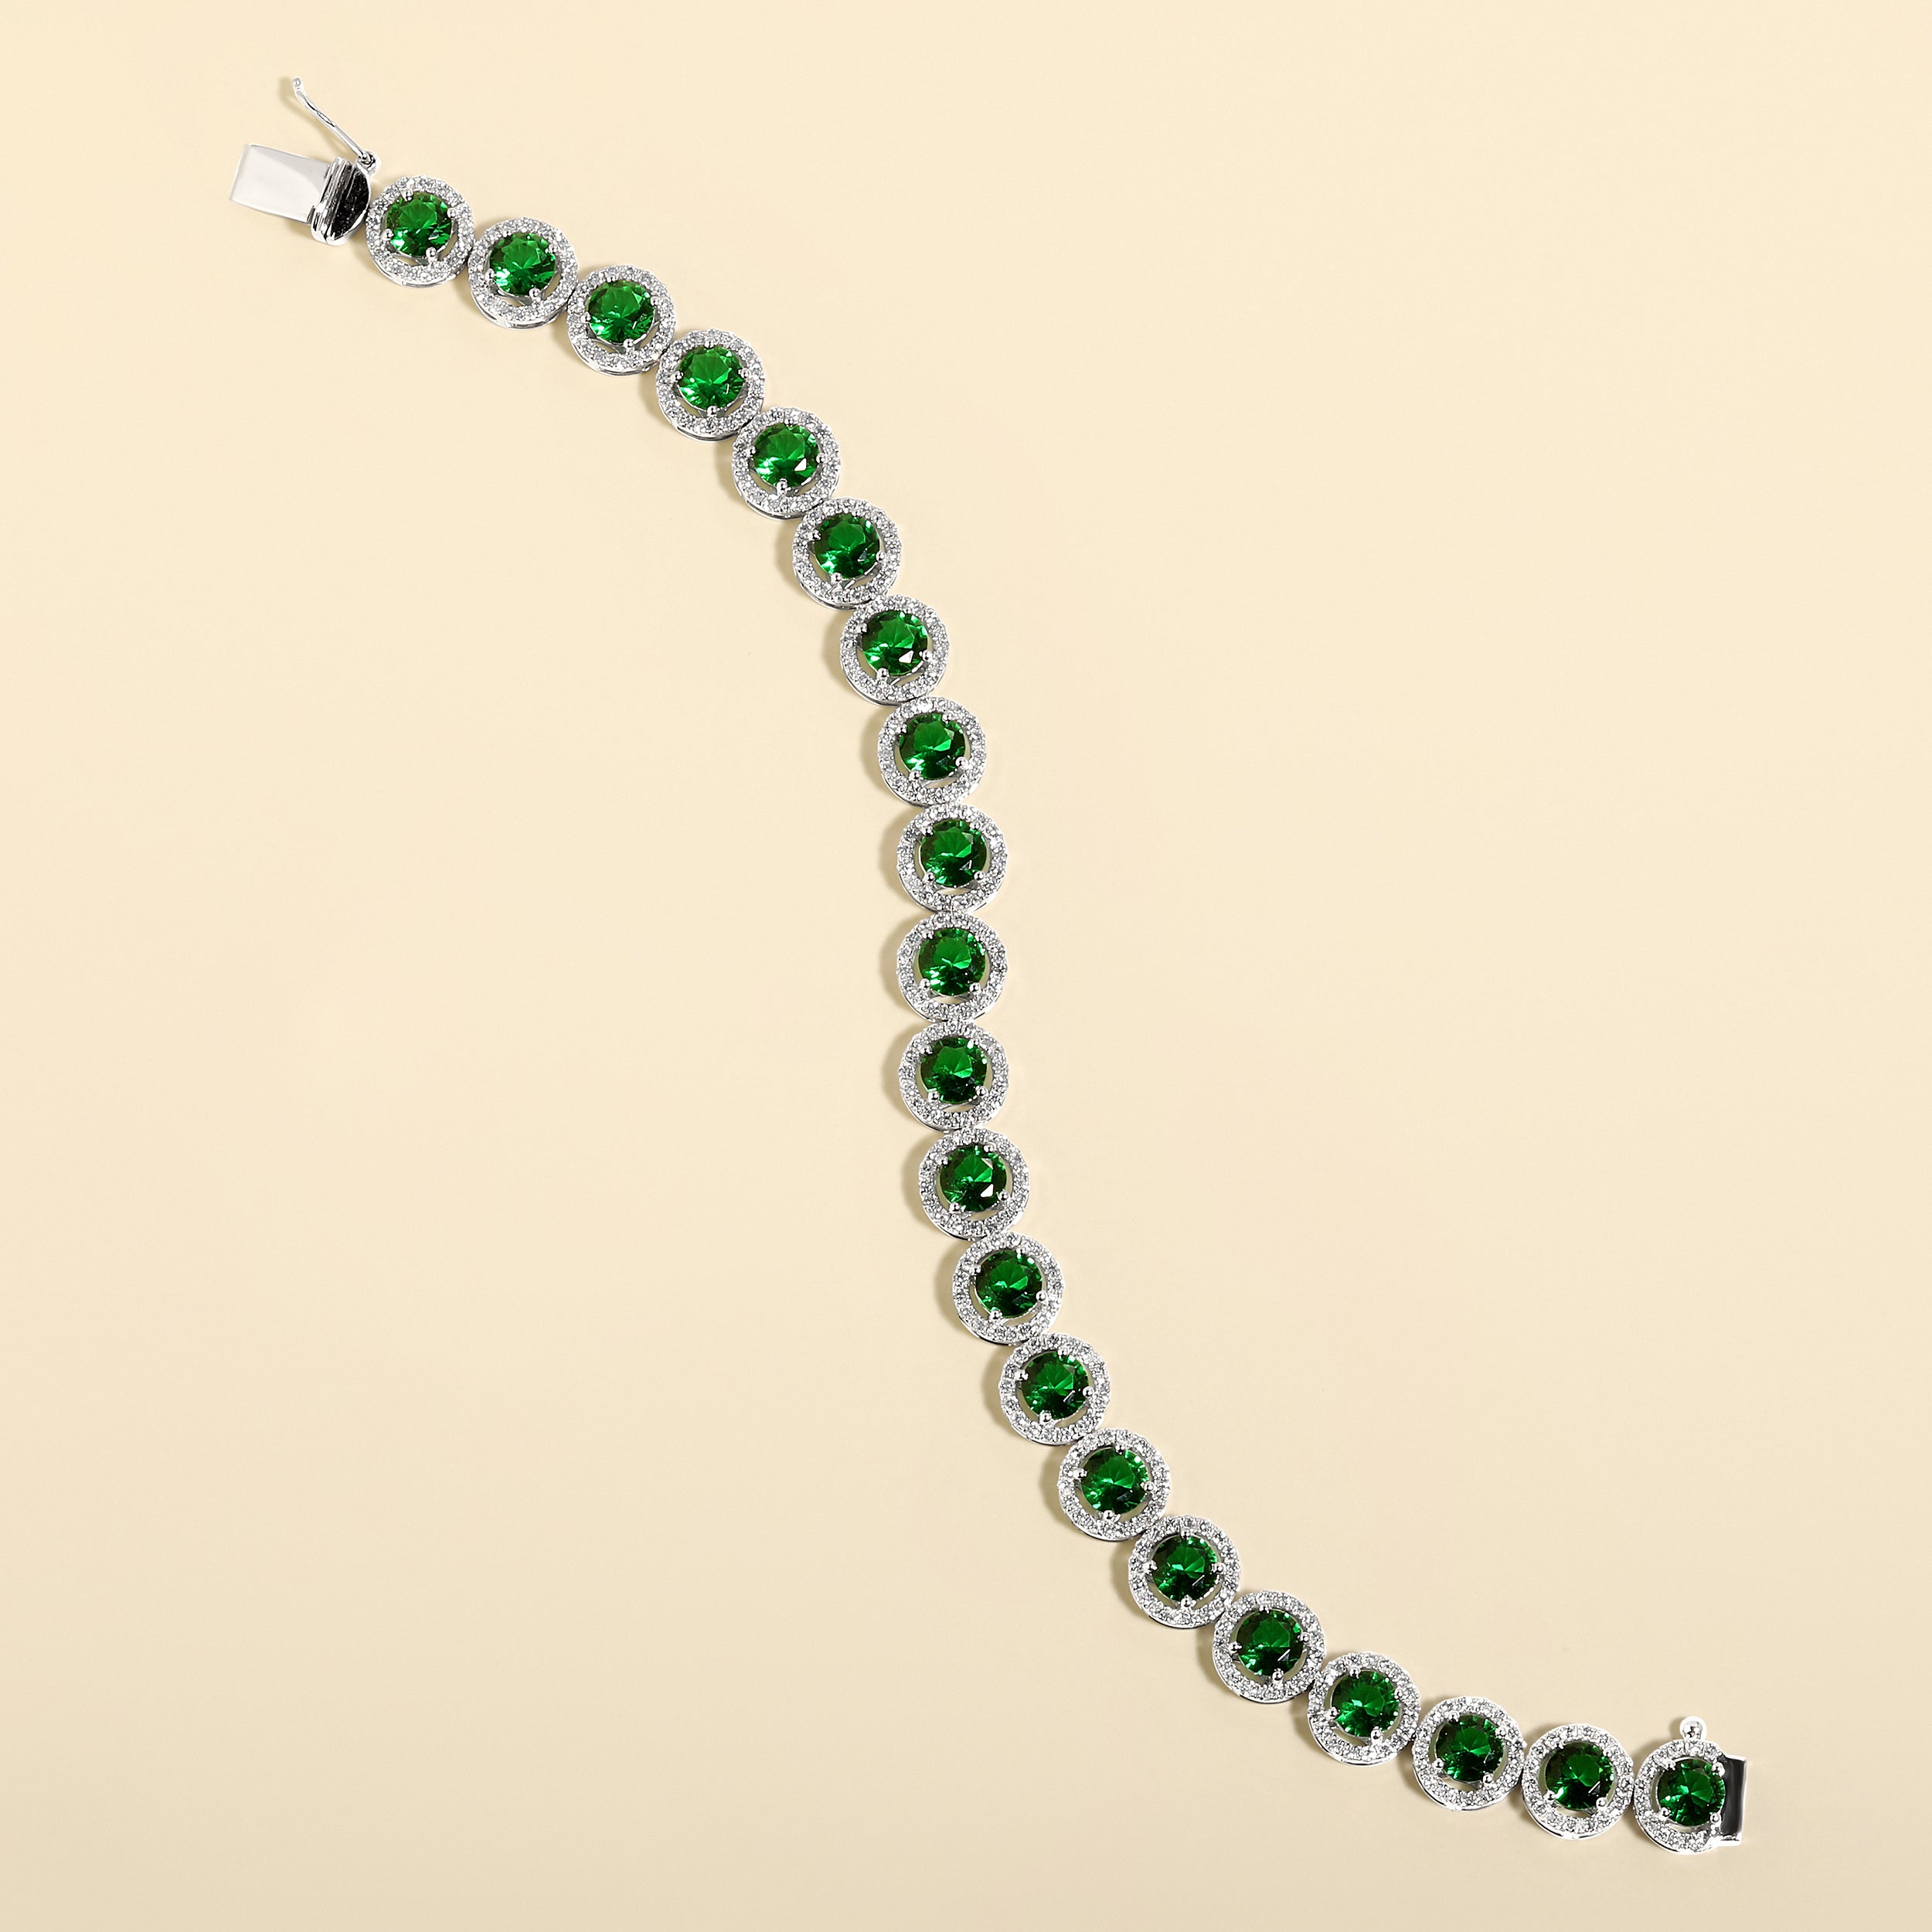 Certified 14K Gold 10.6ct Natural Diamond w/ Simulated Green Emerald Round Tennis White Bracelet